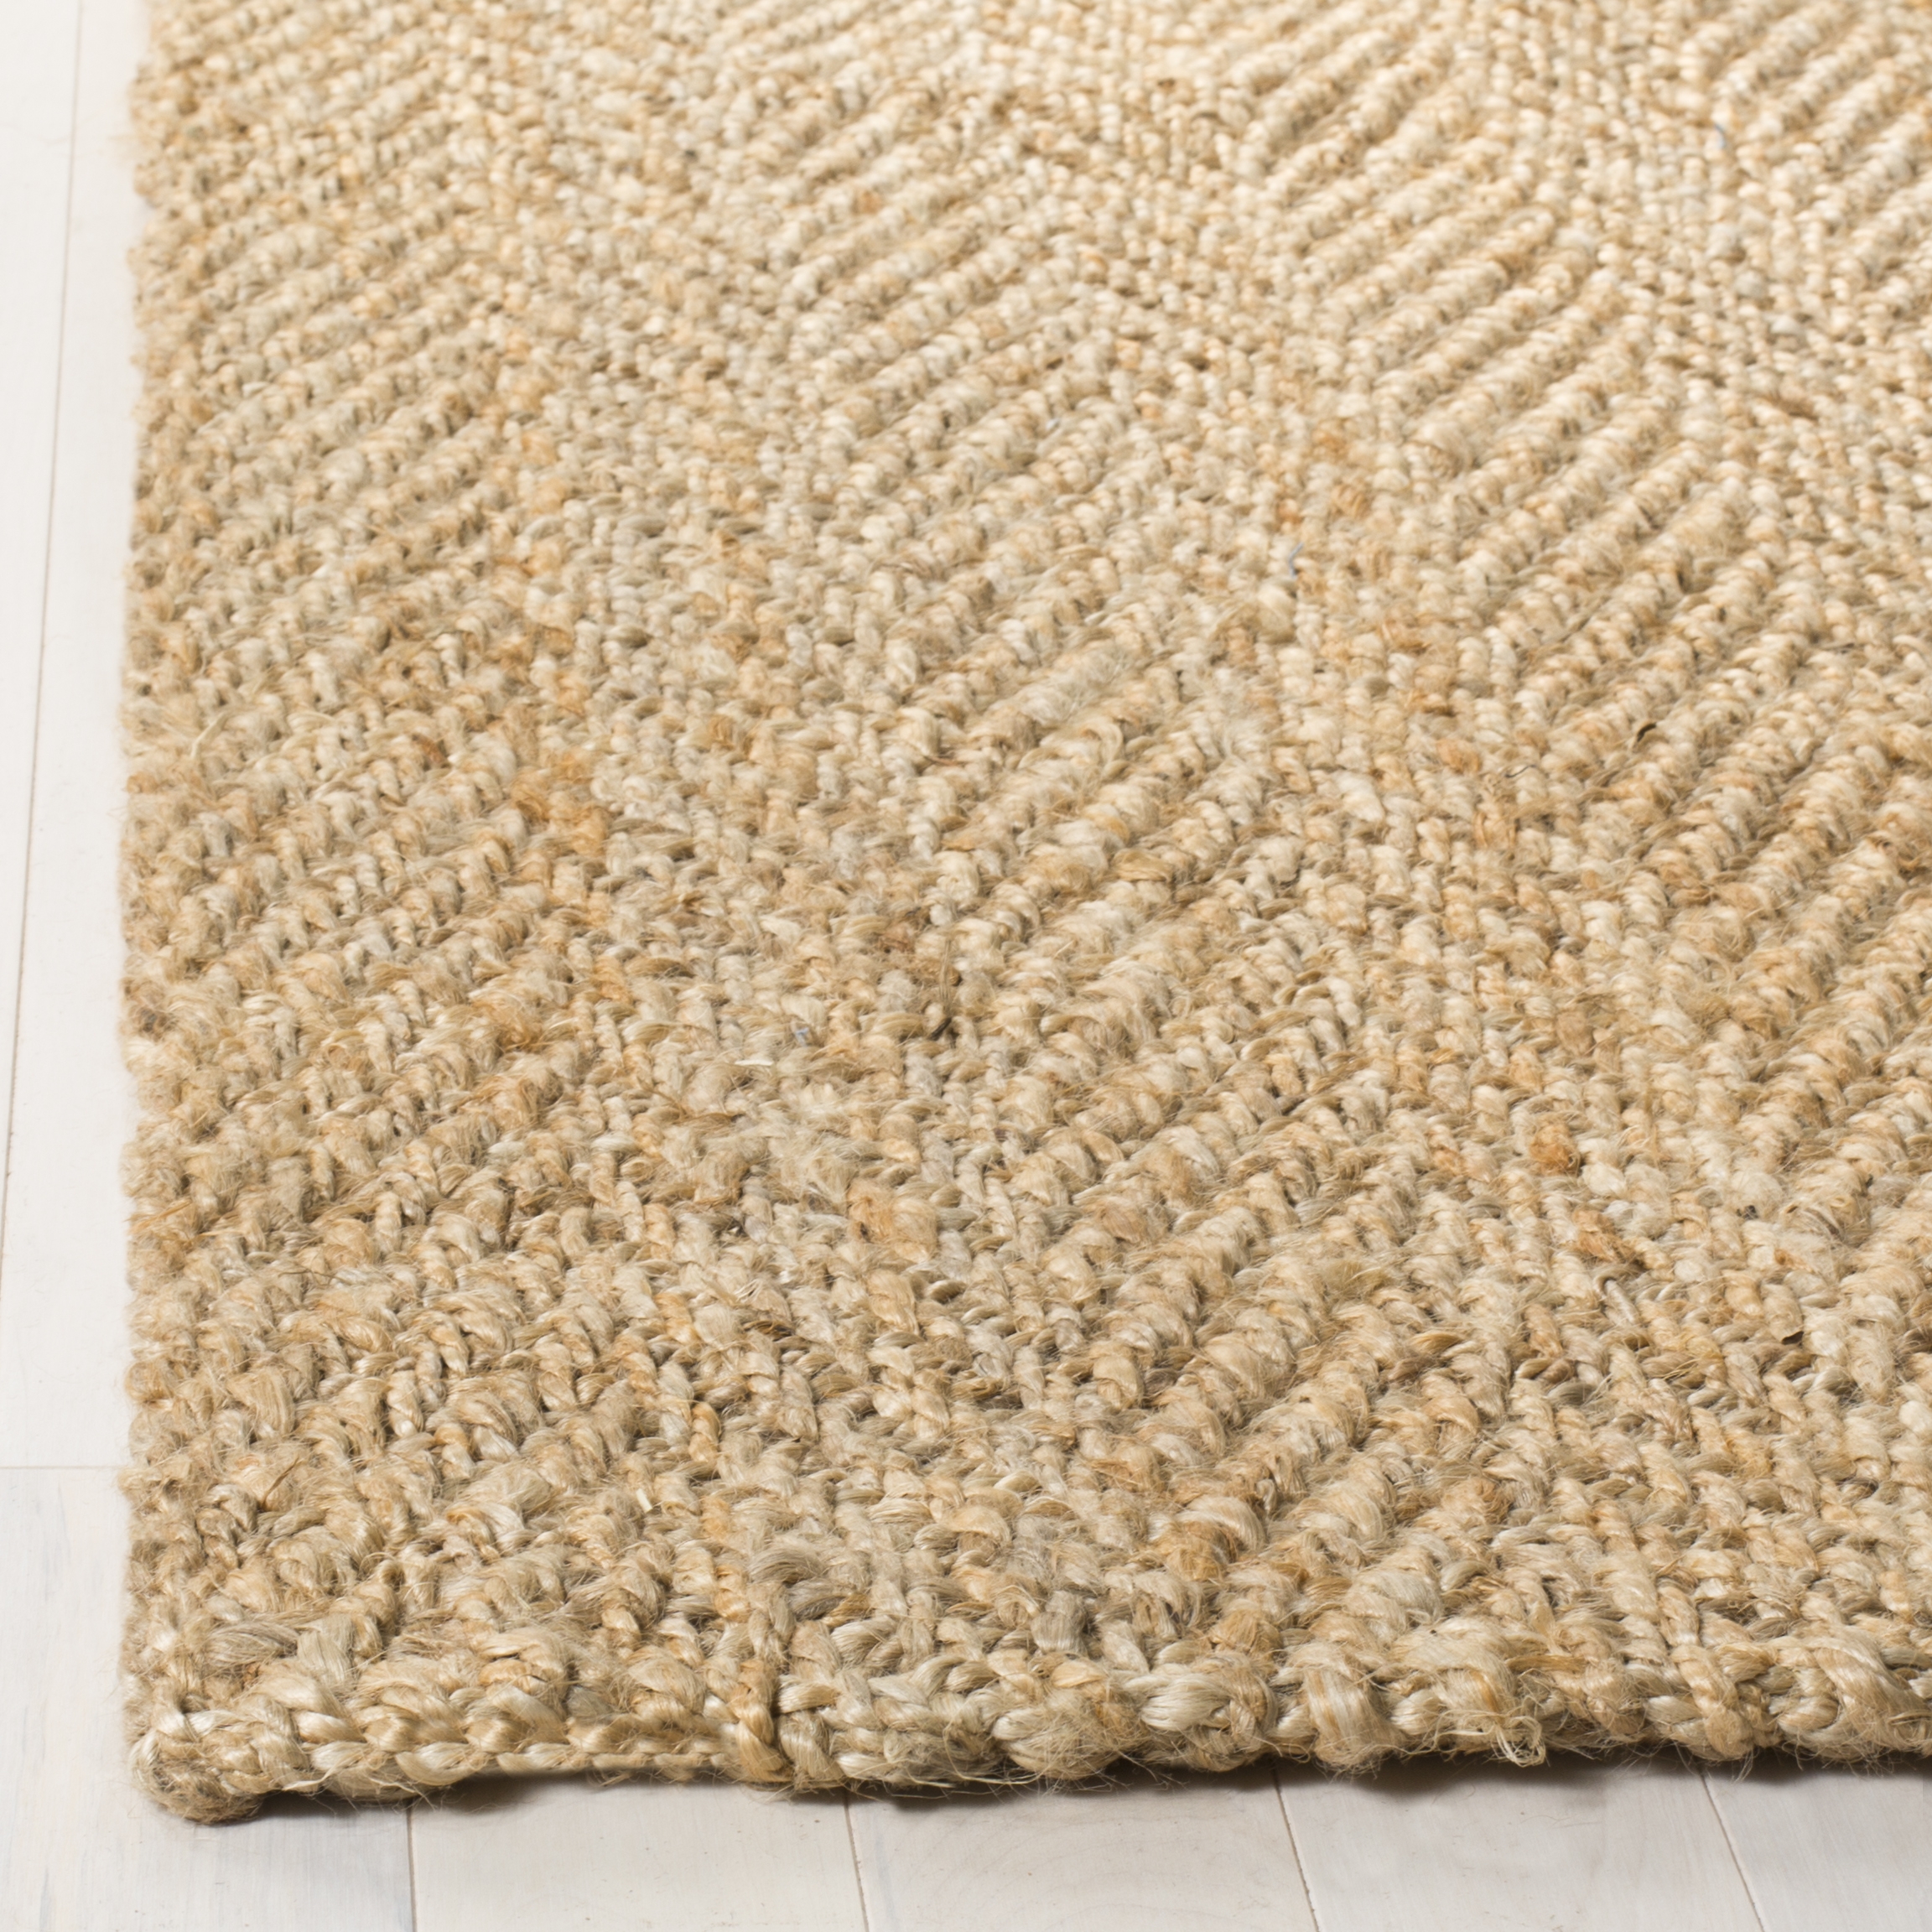 Arlo Home Hand Woven Area Rug, NF263A, Natural,  4' X 6' - Image 2